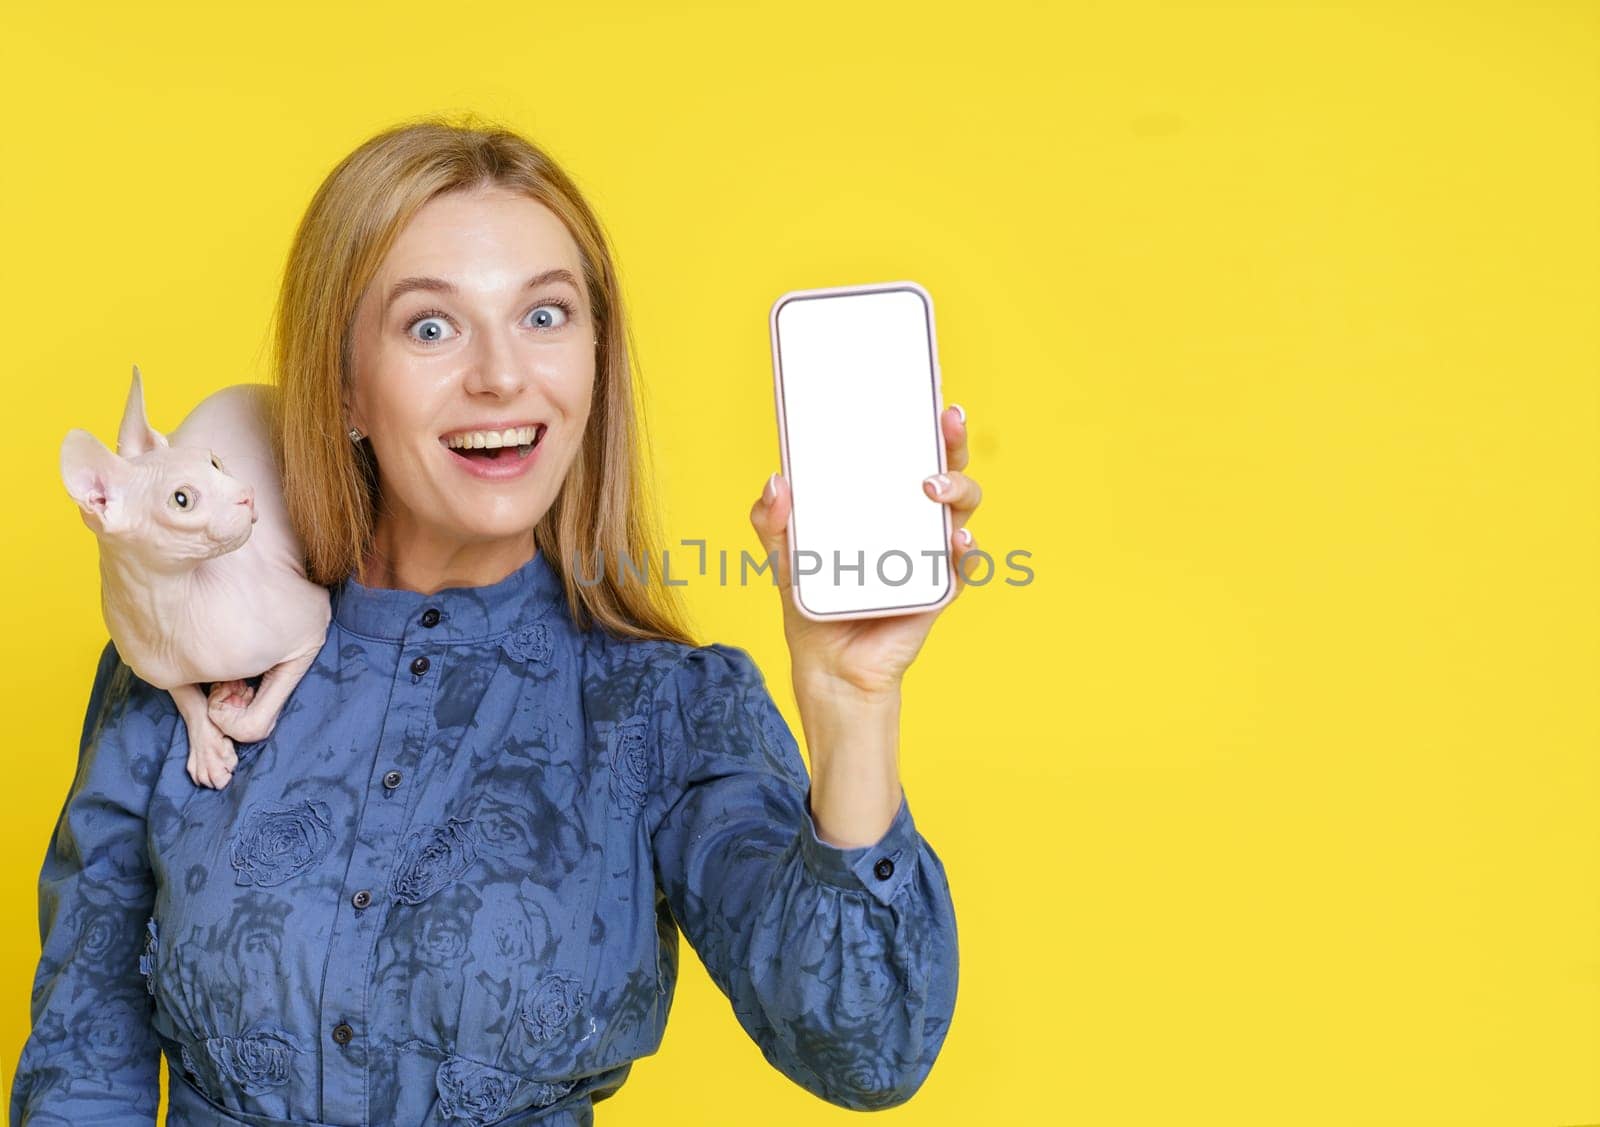 Cat lover hold furry feline companion and show phone with white copy space on display. Isolated on yellow background. Bond between pet owner and beloved cat, blending technology and joy of pet ownership. High quality photo